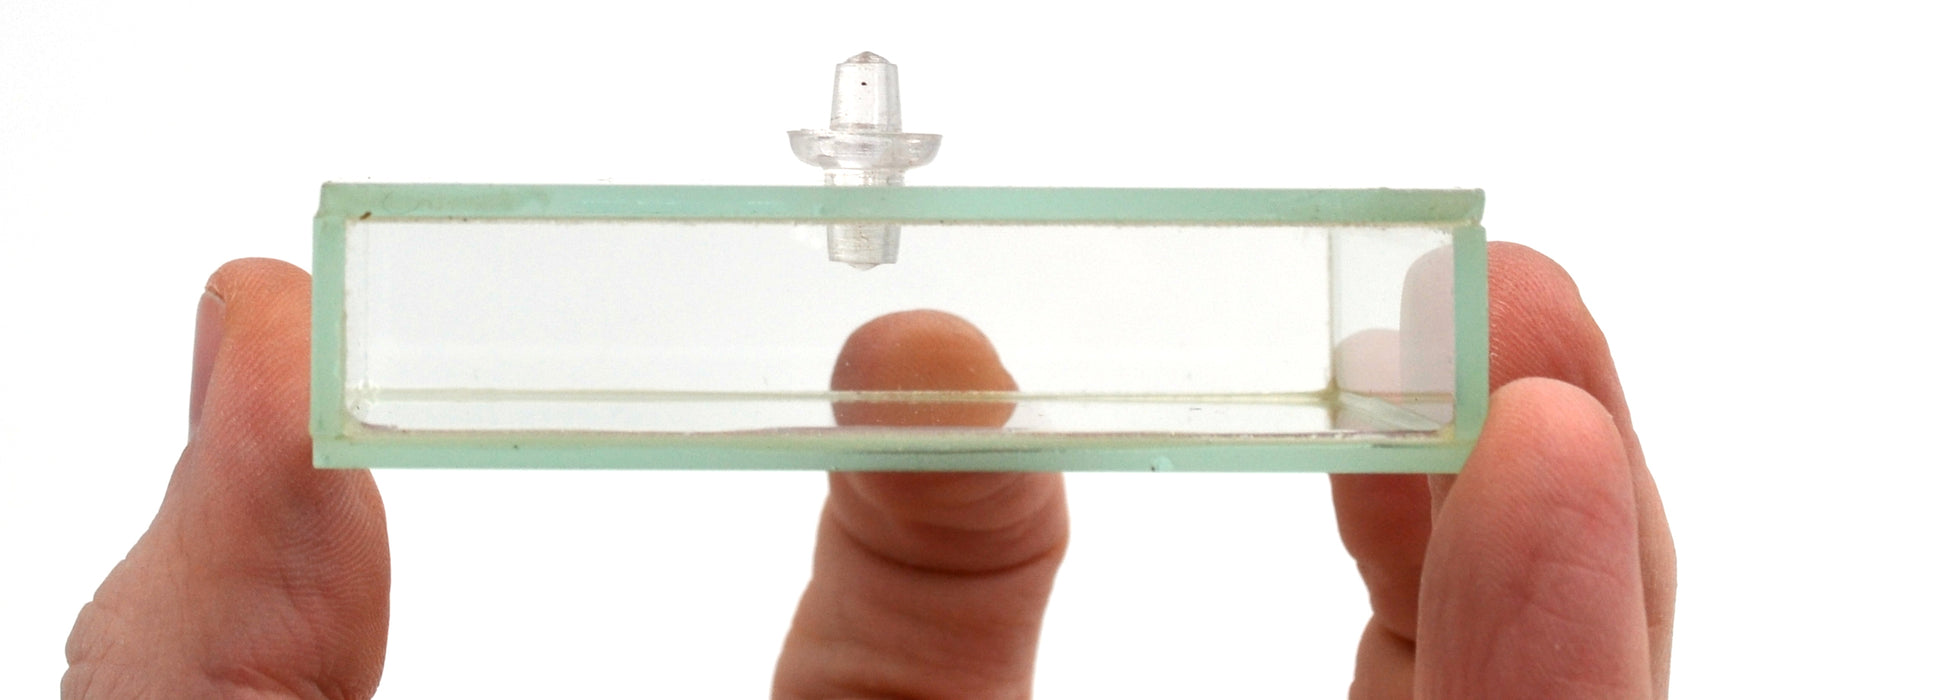 Hollow Glass Prism & Stopper, 3x2x0.7" - Great for Studying Snells Law of Refraction - Eisco Labs